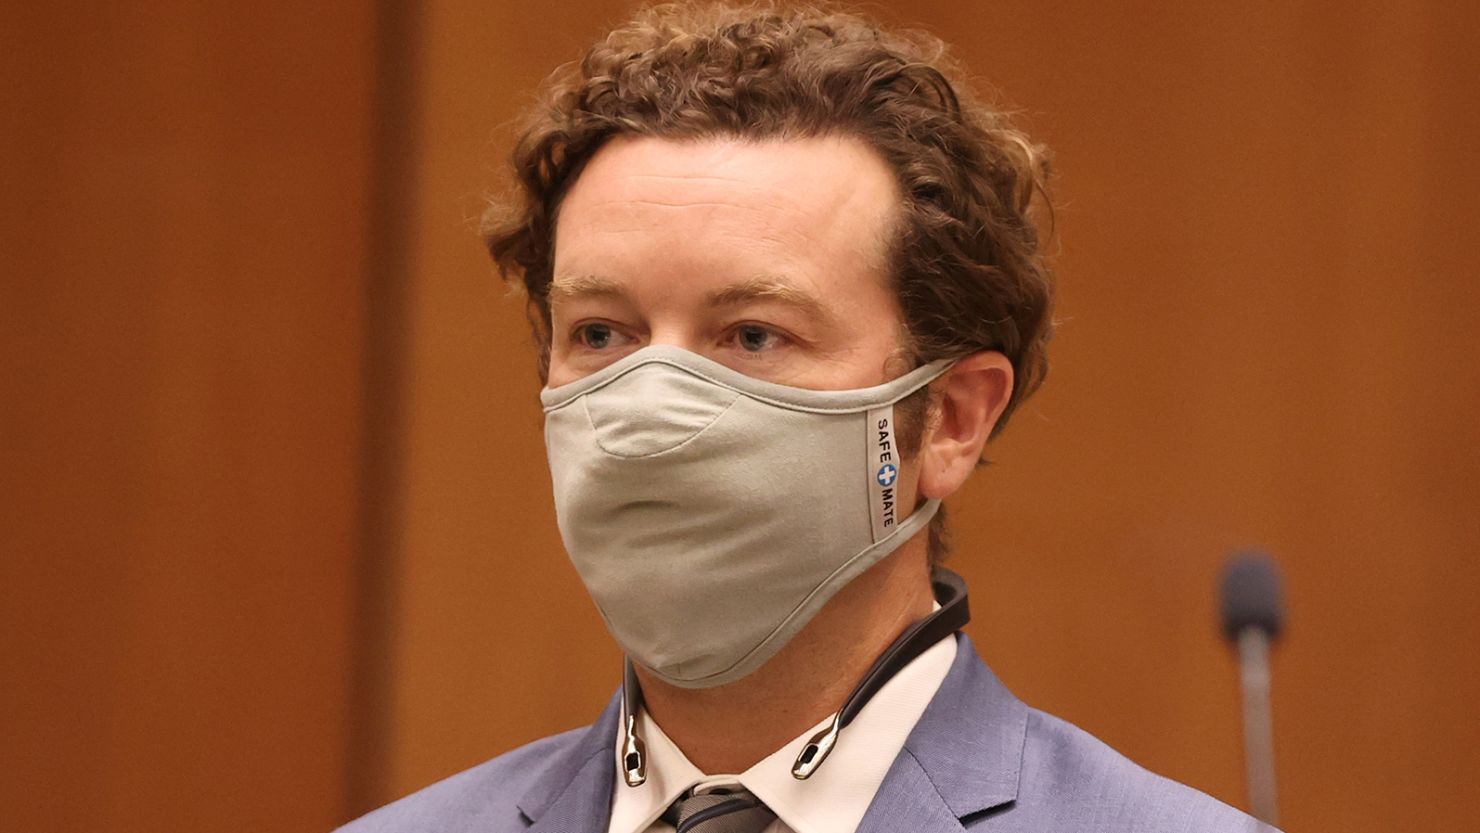 The rape trial of Danny Masterson, seen here while being arraigned in 2020 in Los Angeles, has been declared a mistrial.